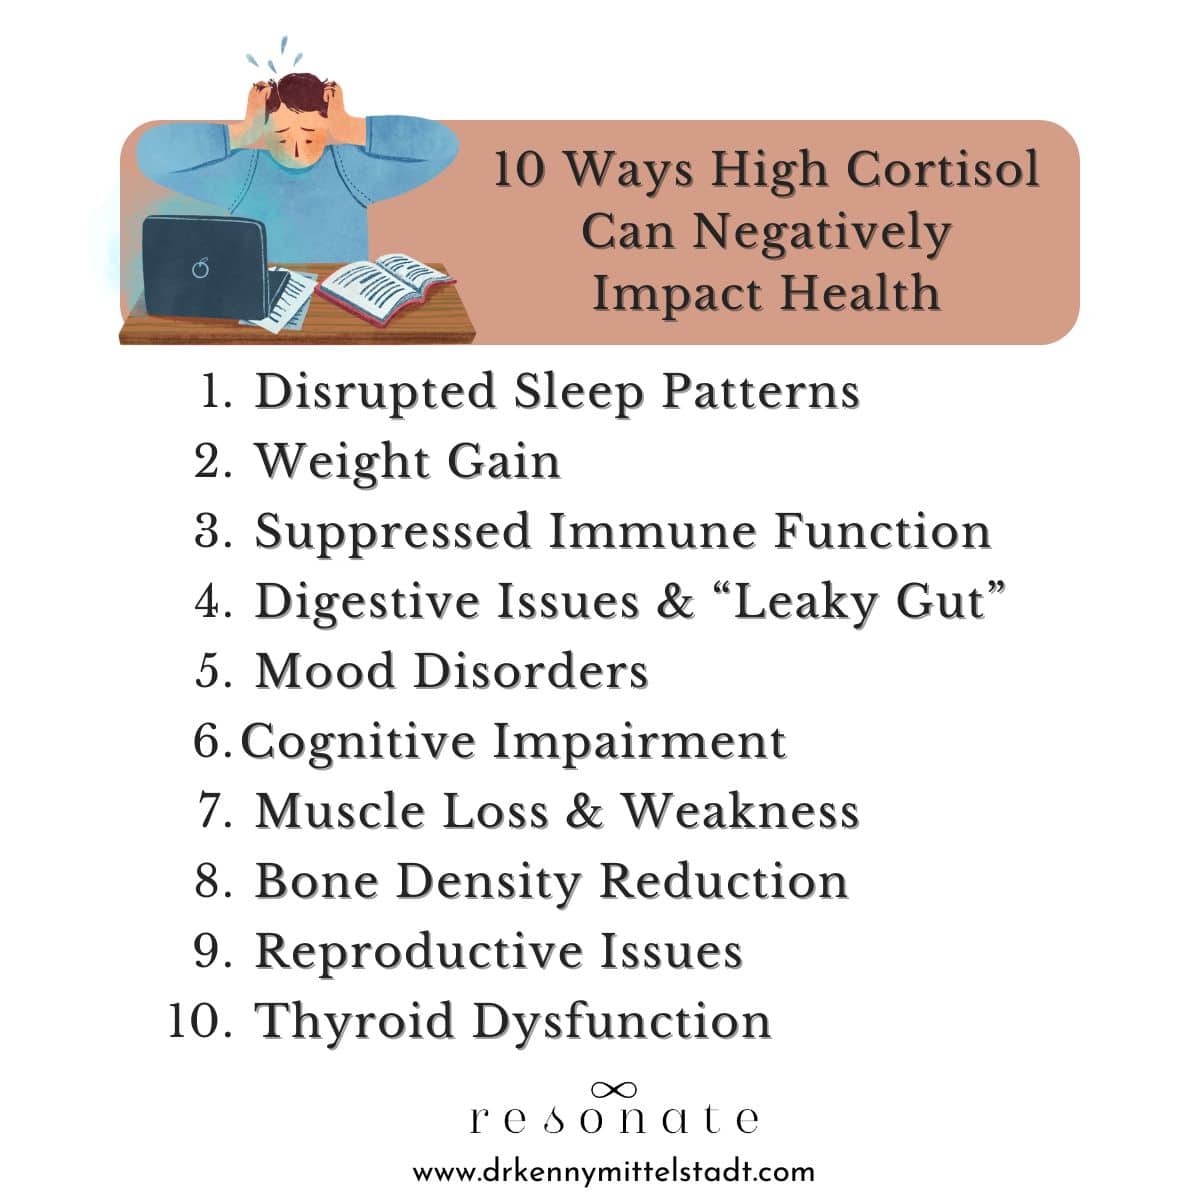 This image contains a list of the 10 Ways High Cortisol Can Negatively Impact Your Health that are going to be described in this blog post in order.